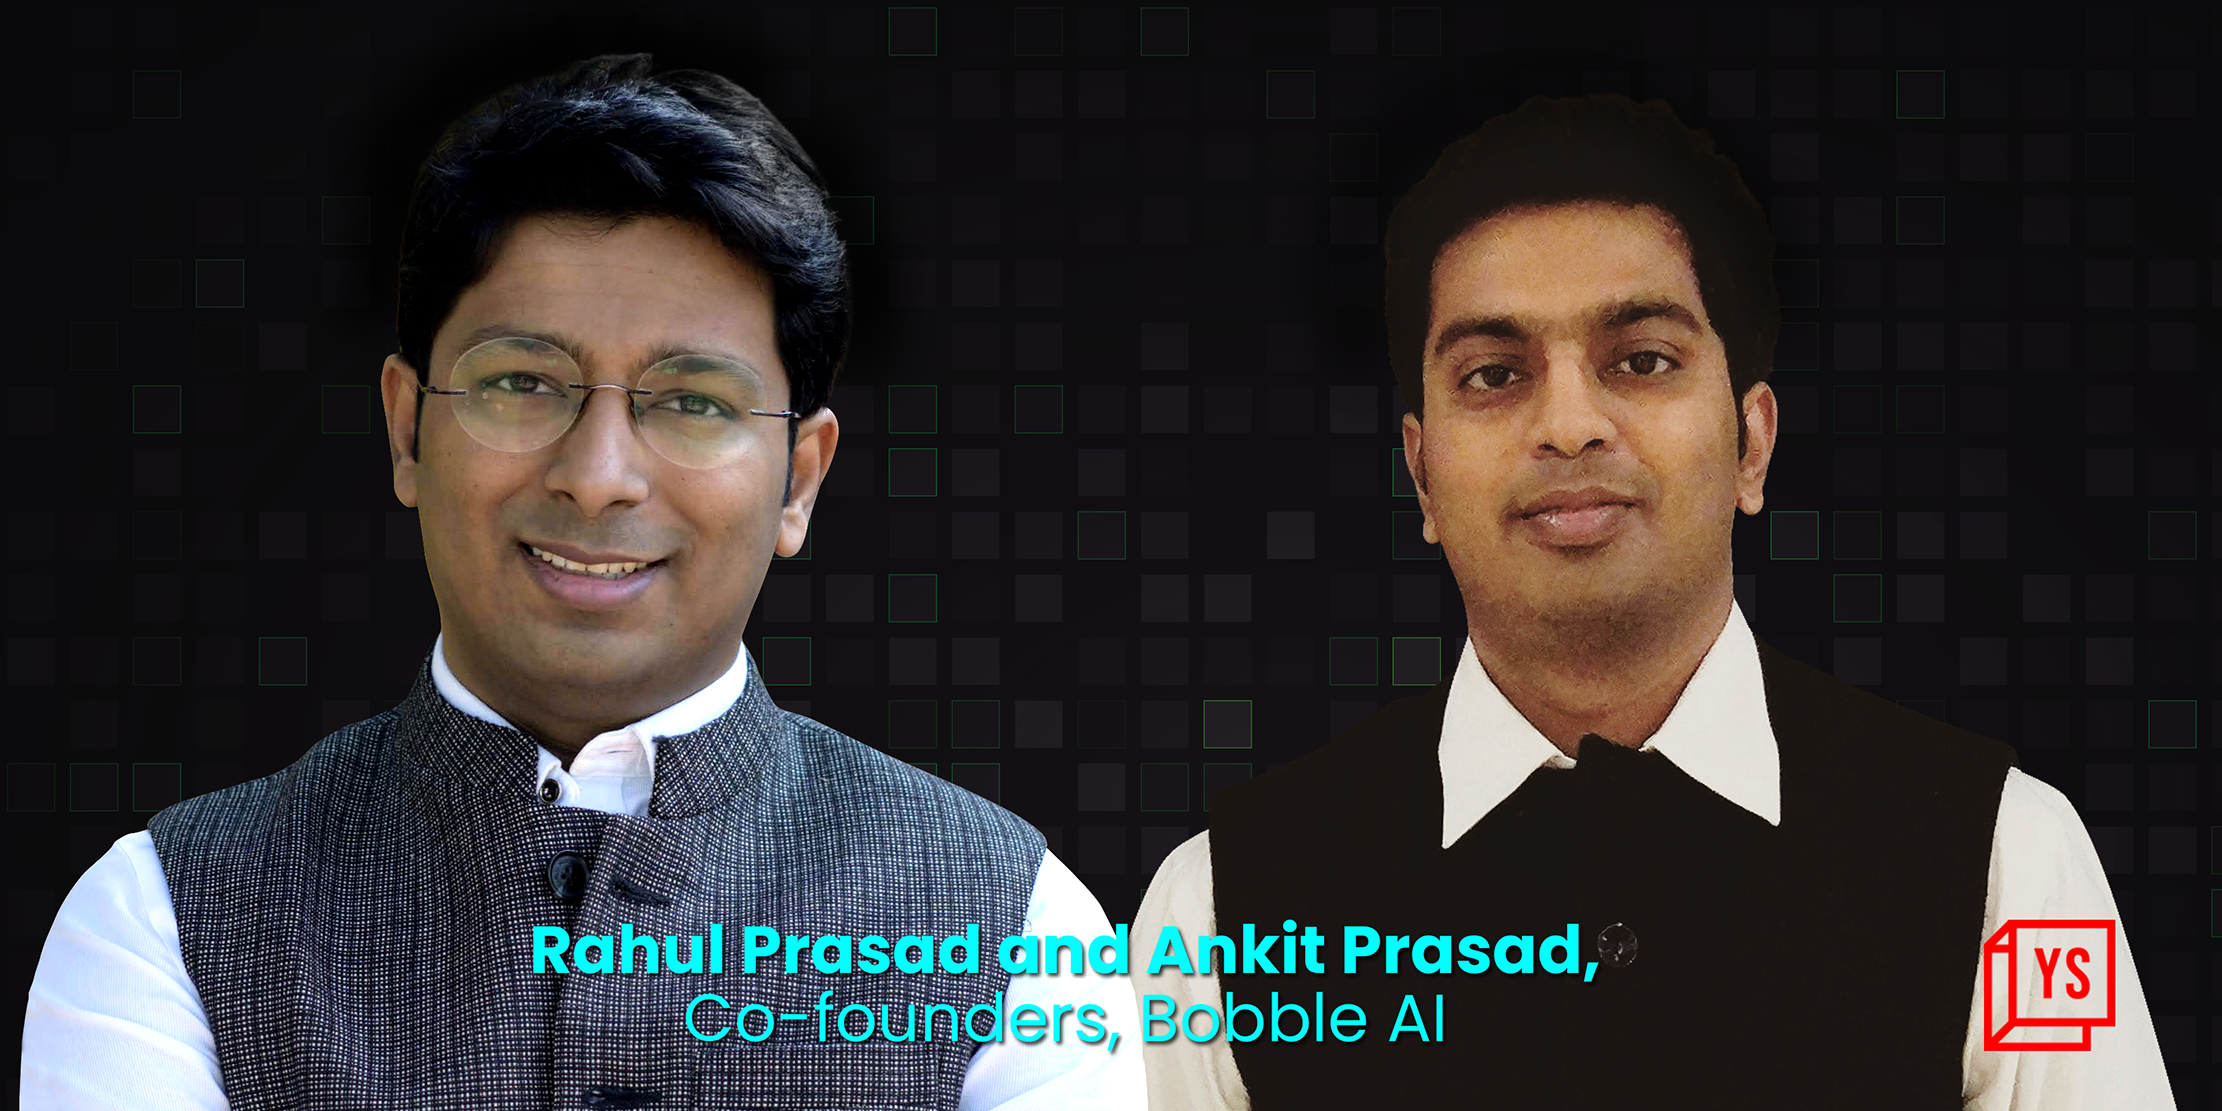 Indic keyboard startup Bobble AI is betting on conversational commerce